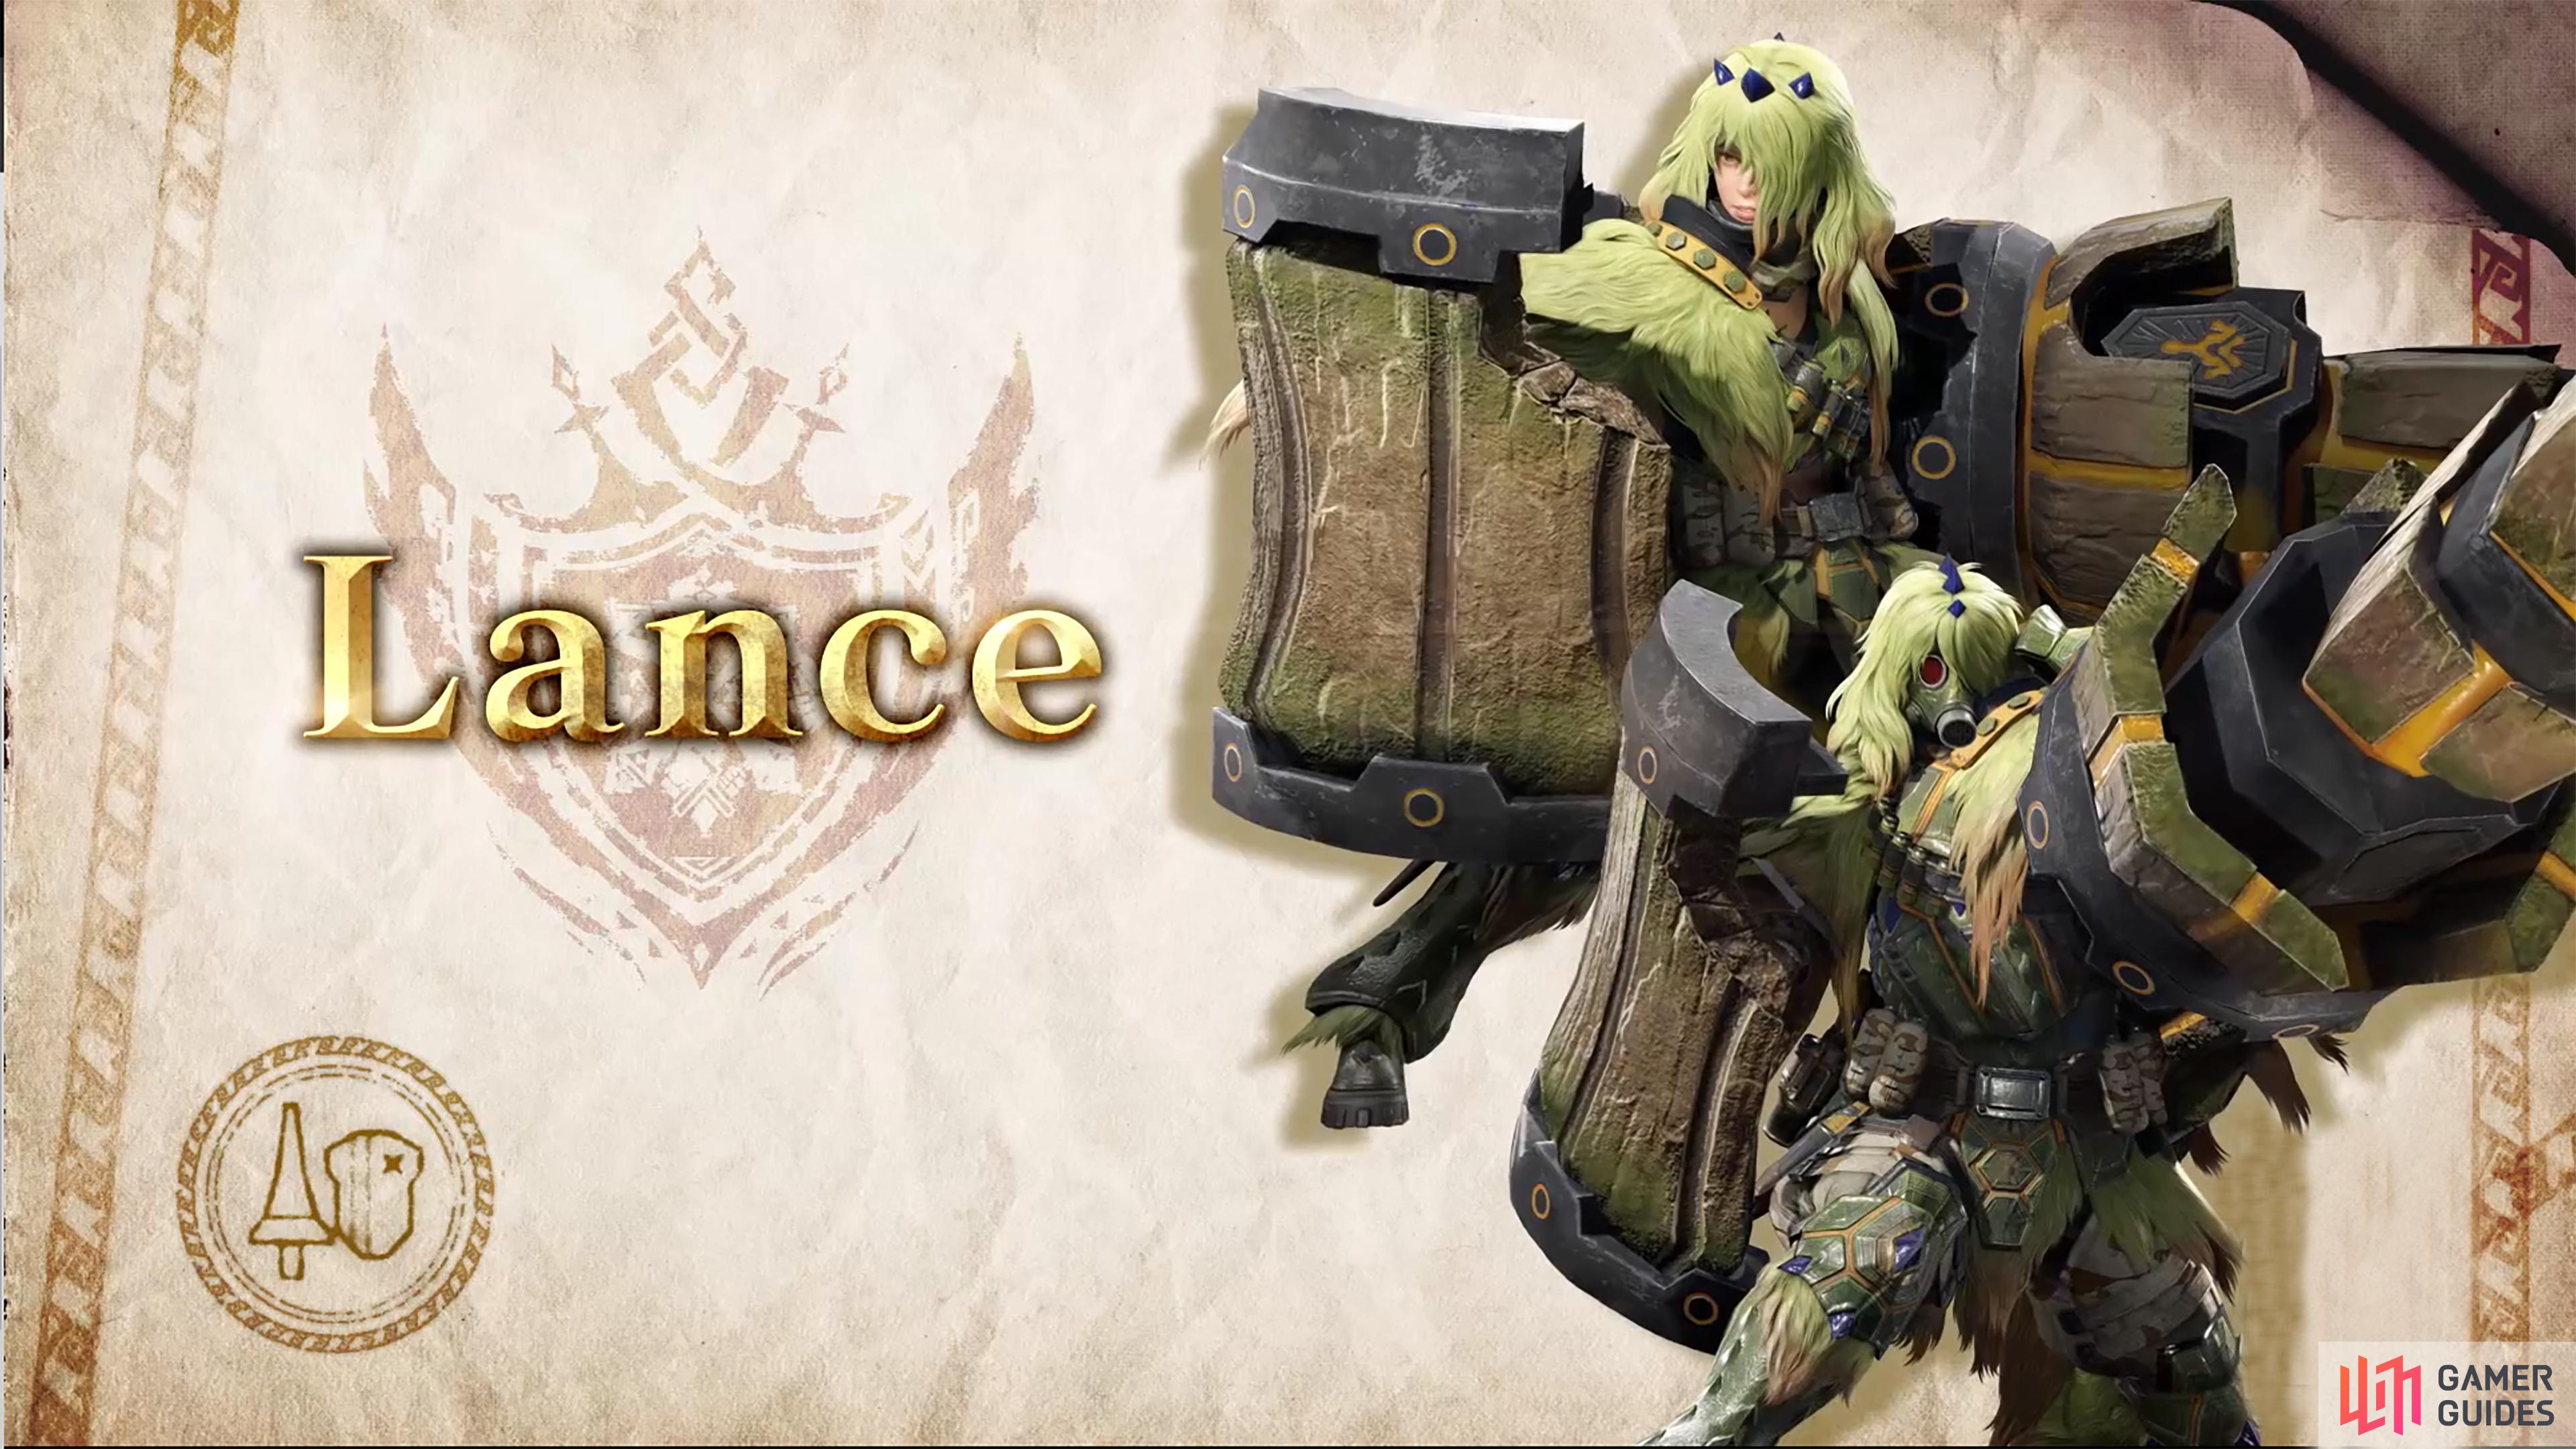 The Lance is a highly defensive weapon whose sturdy shield can withstand fierce attacks.